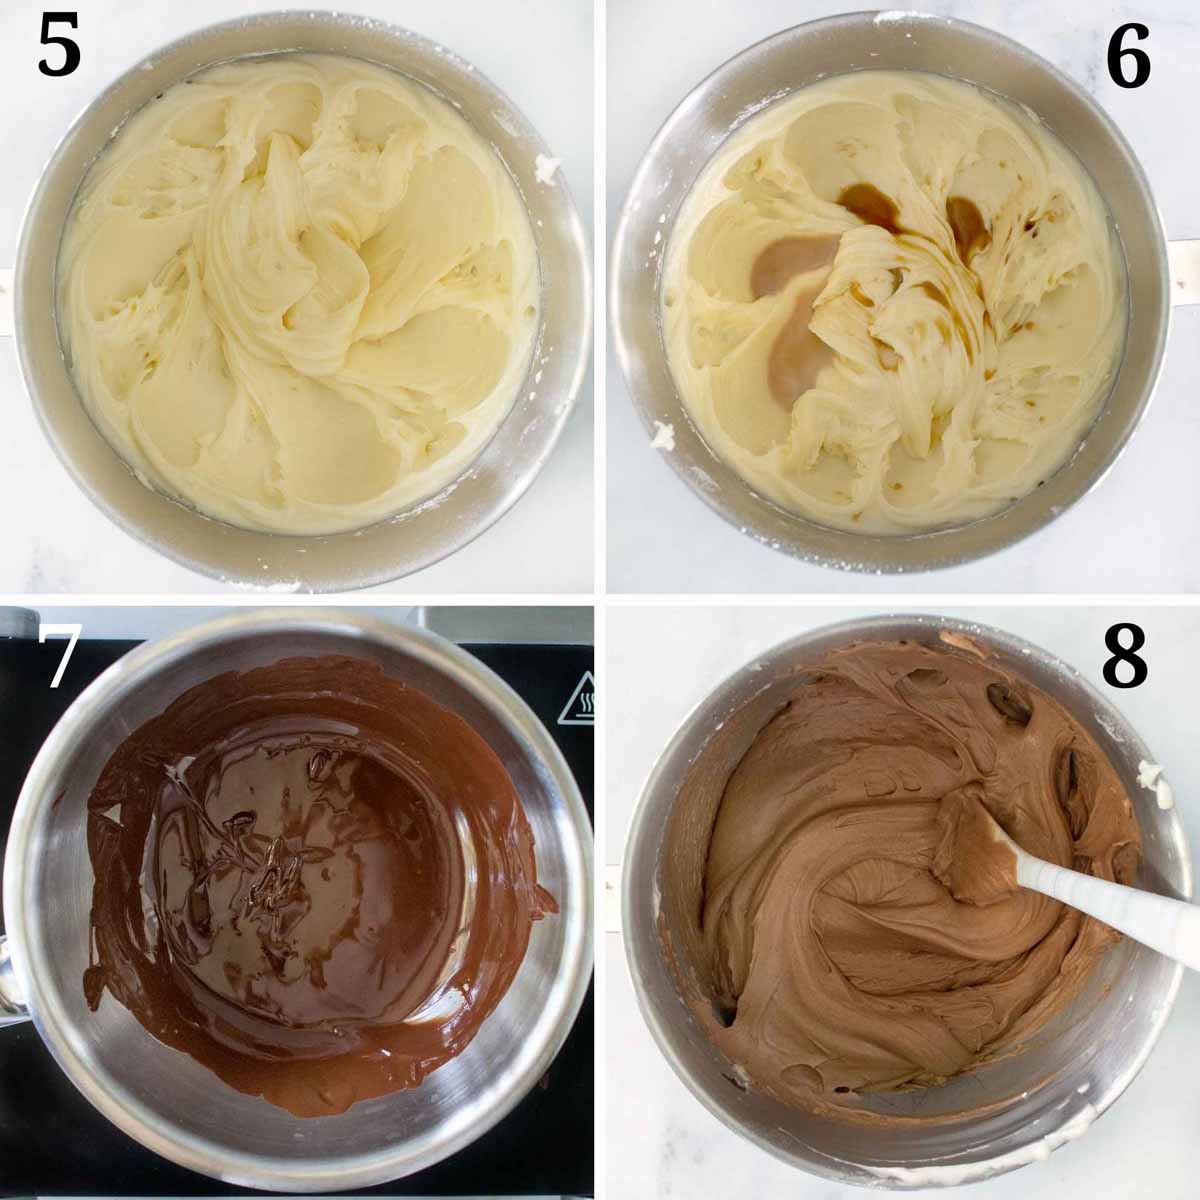 four images showing the next steps in making chocolate frosting